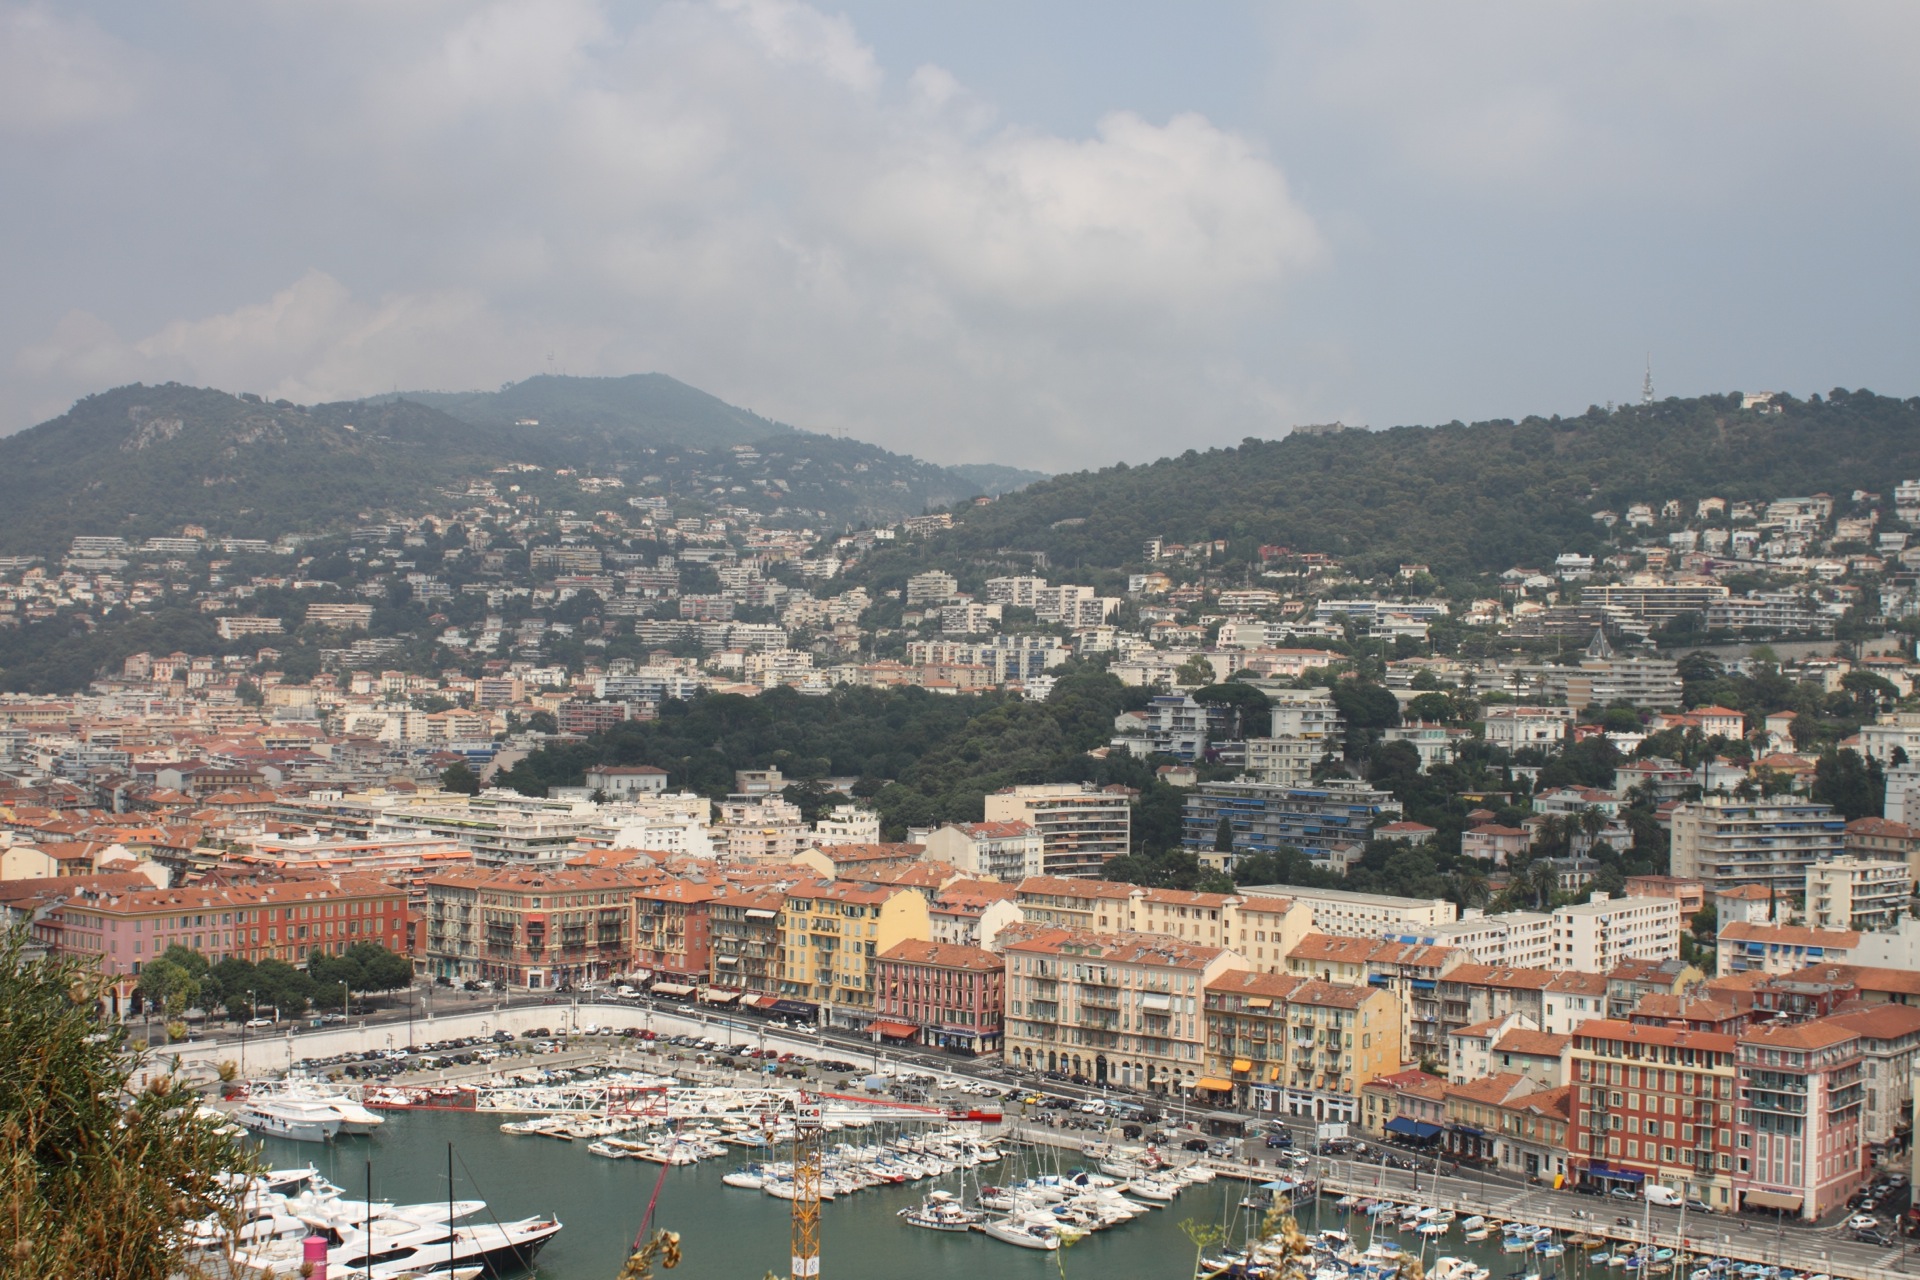 The port at Nice